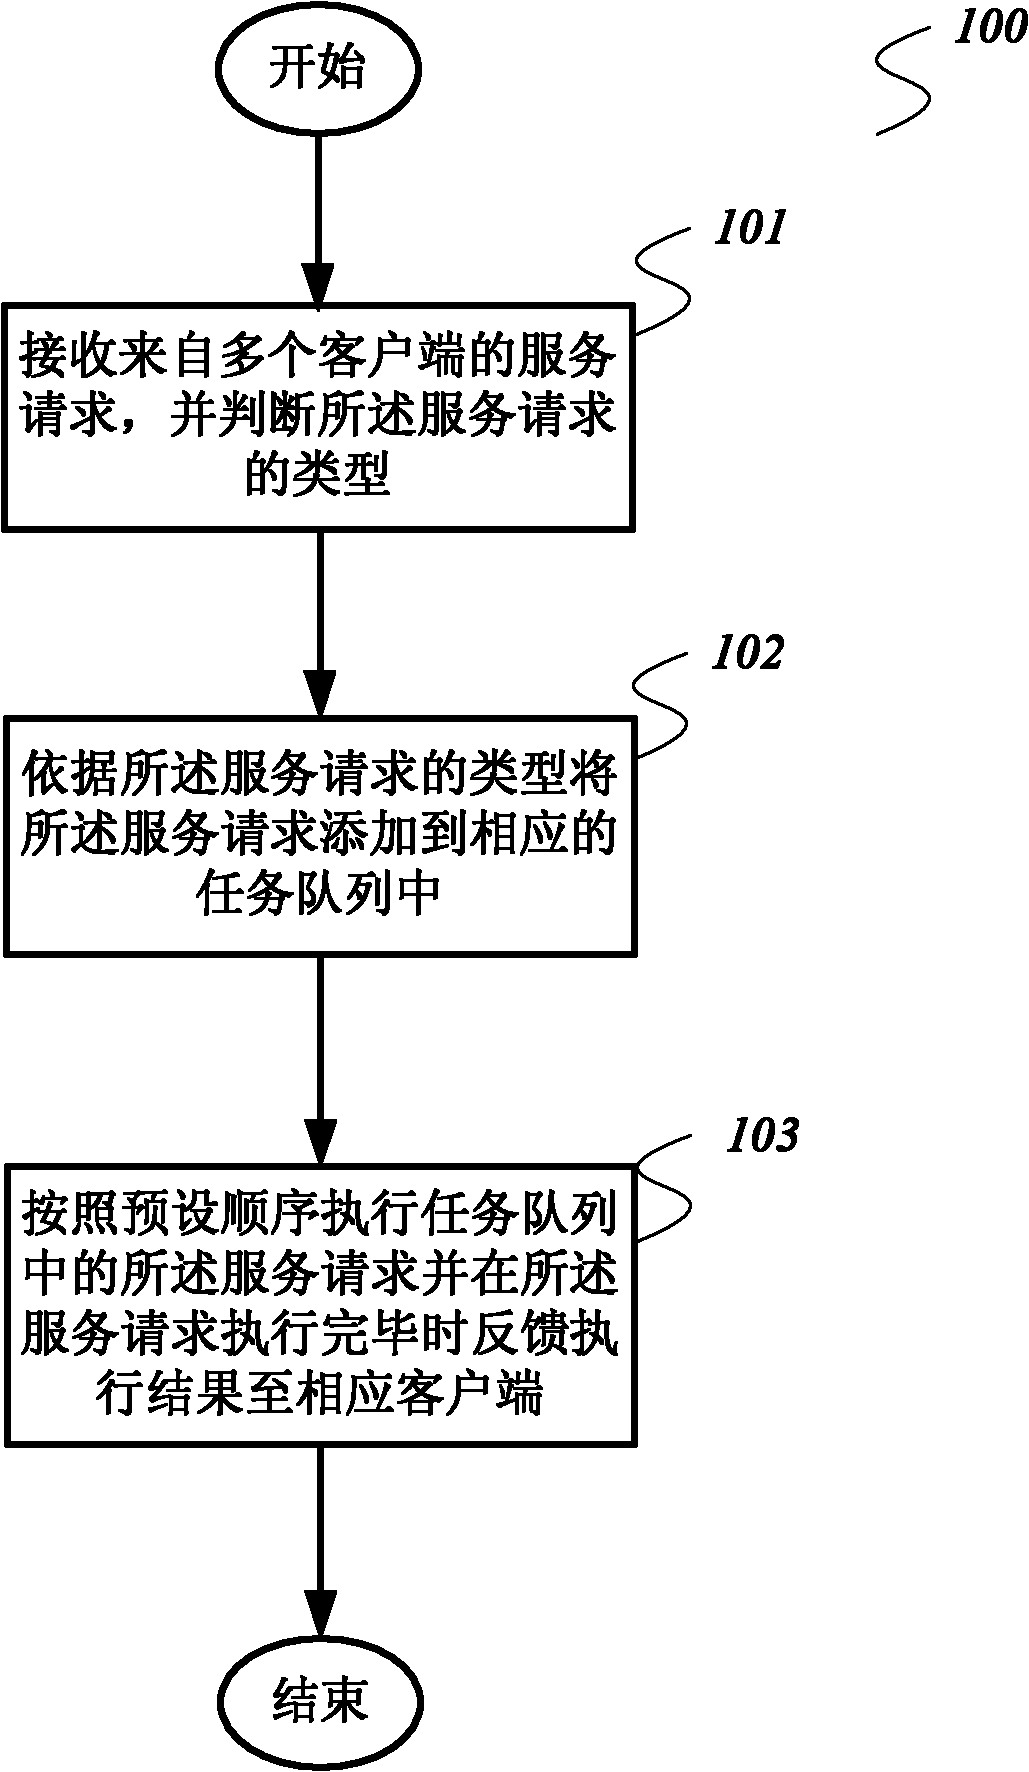 Multi-user control method and multi-user control system for communication equipment and server